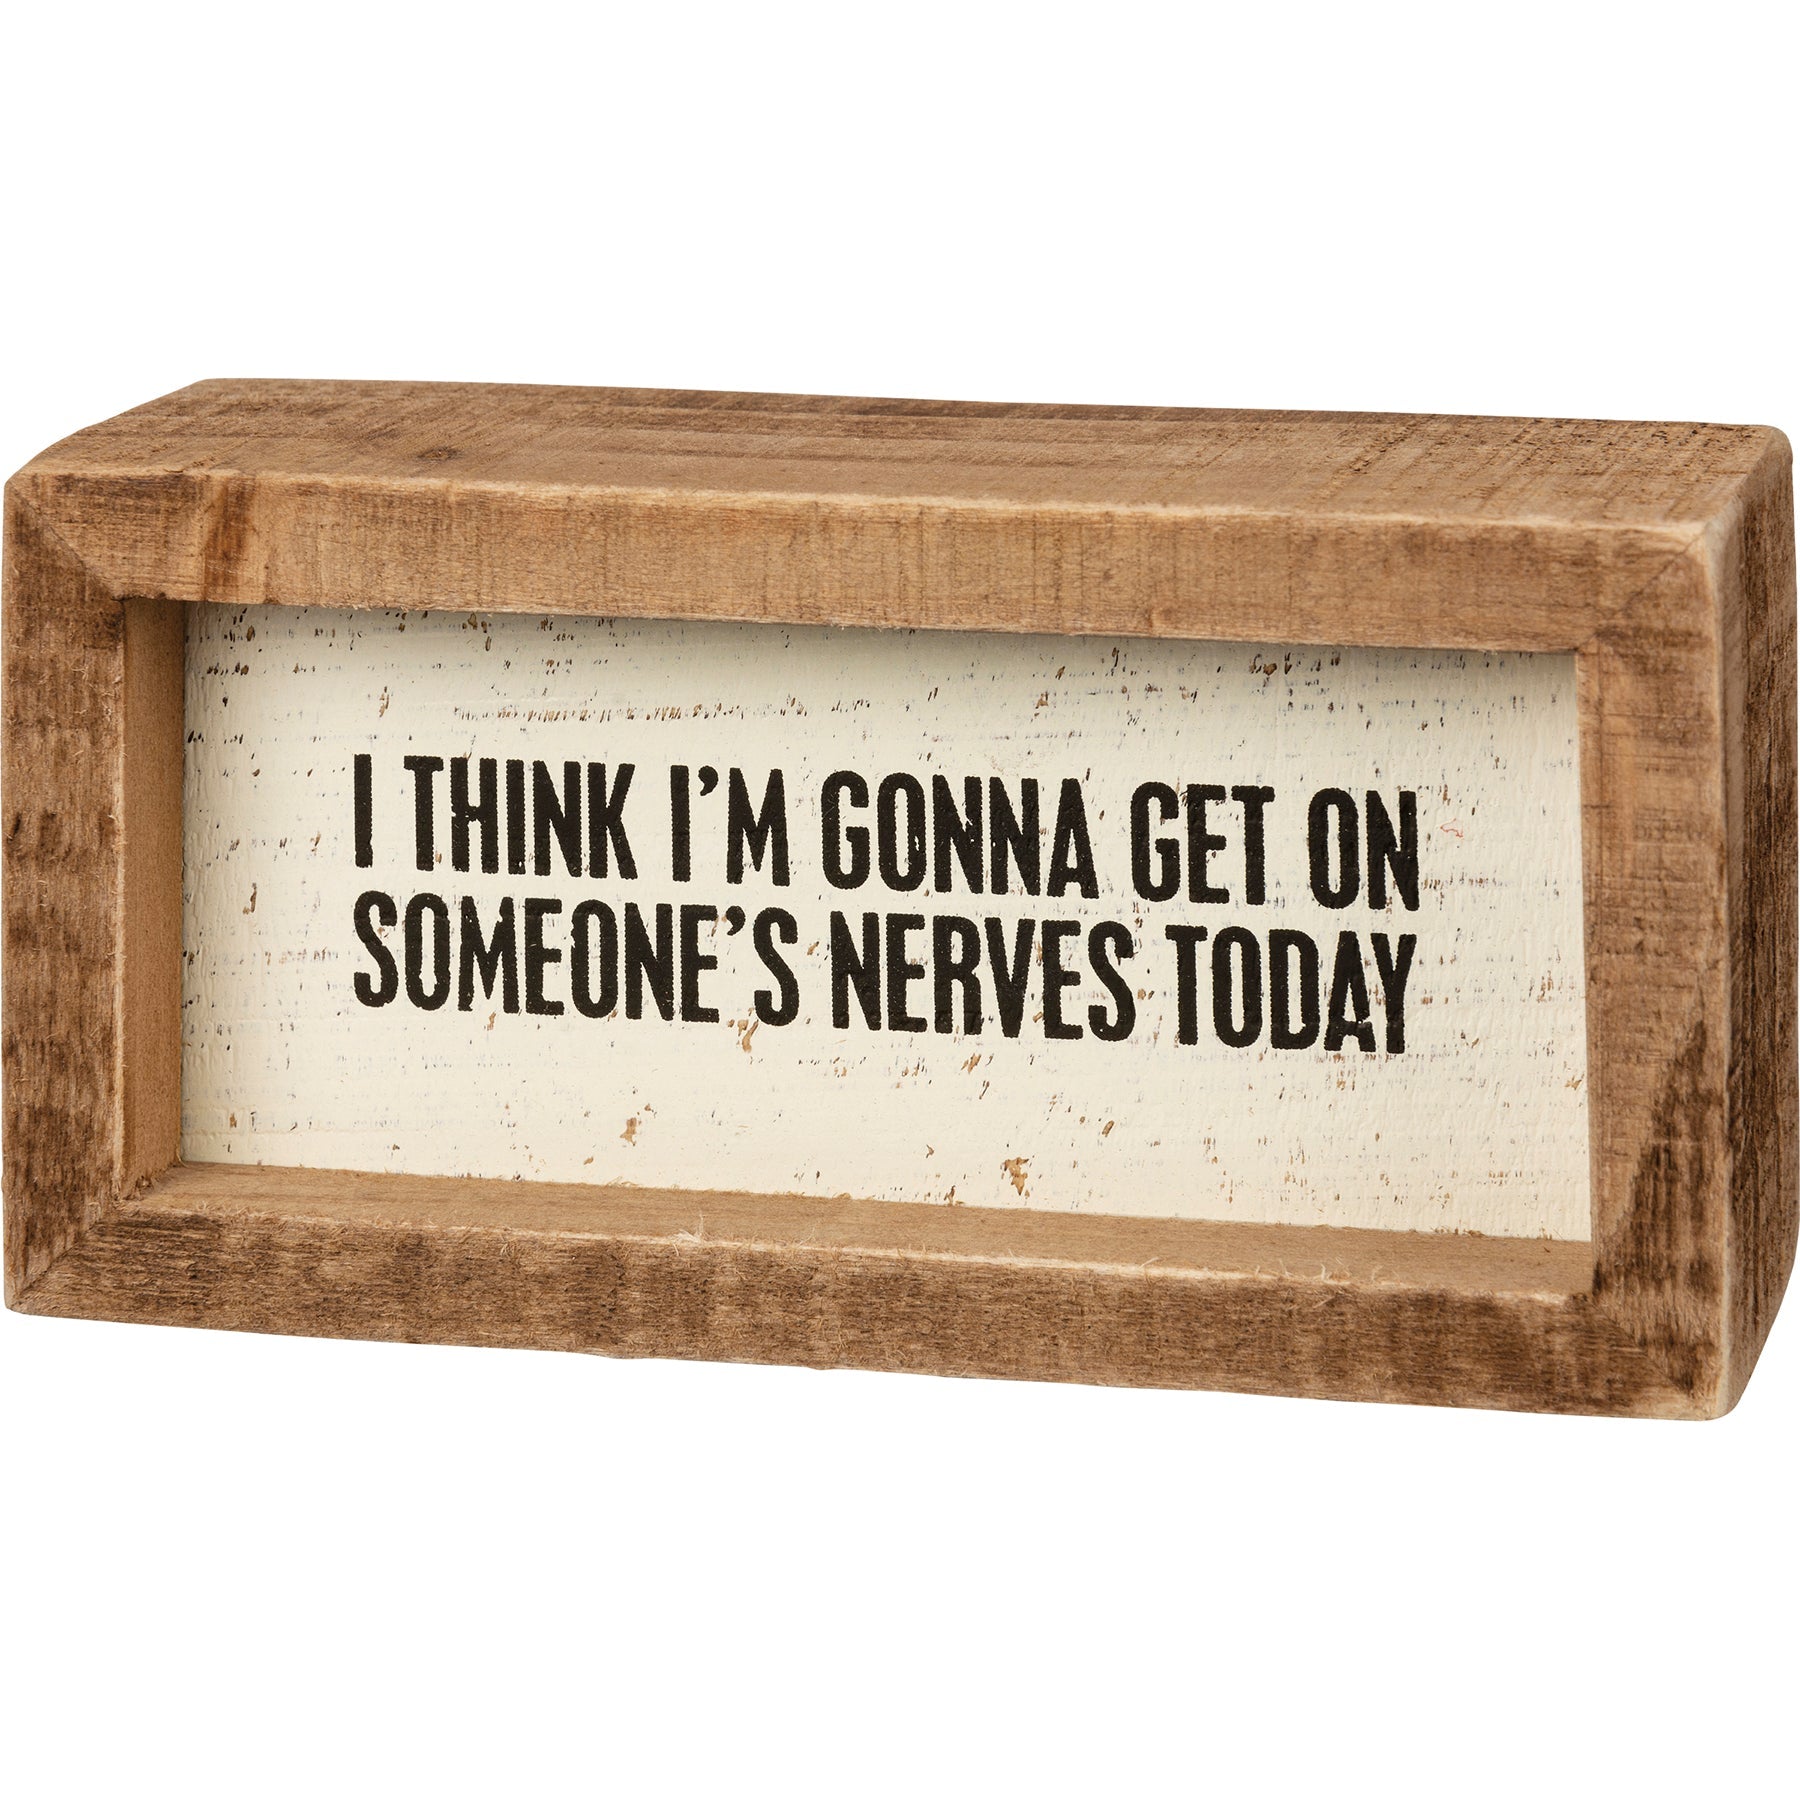 I Think I'm Gonna Get On Someone's Nerves Today Wooden Inset Box Sign | Rustic Farmhouse